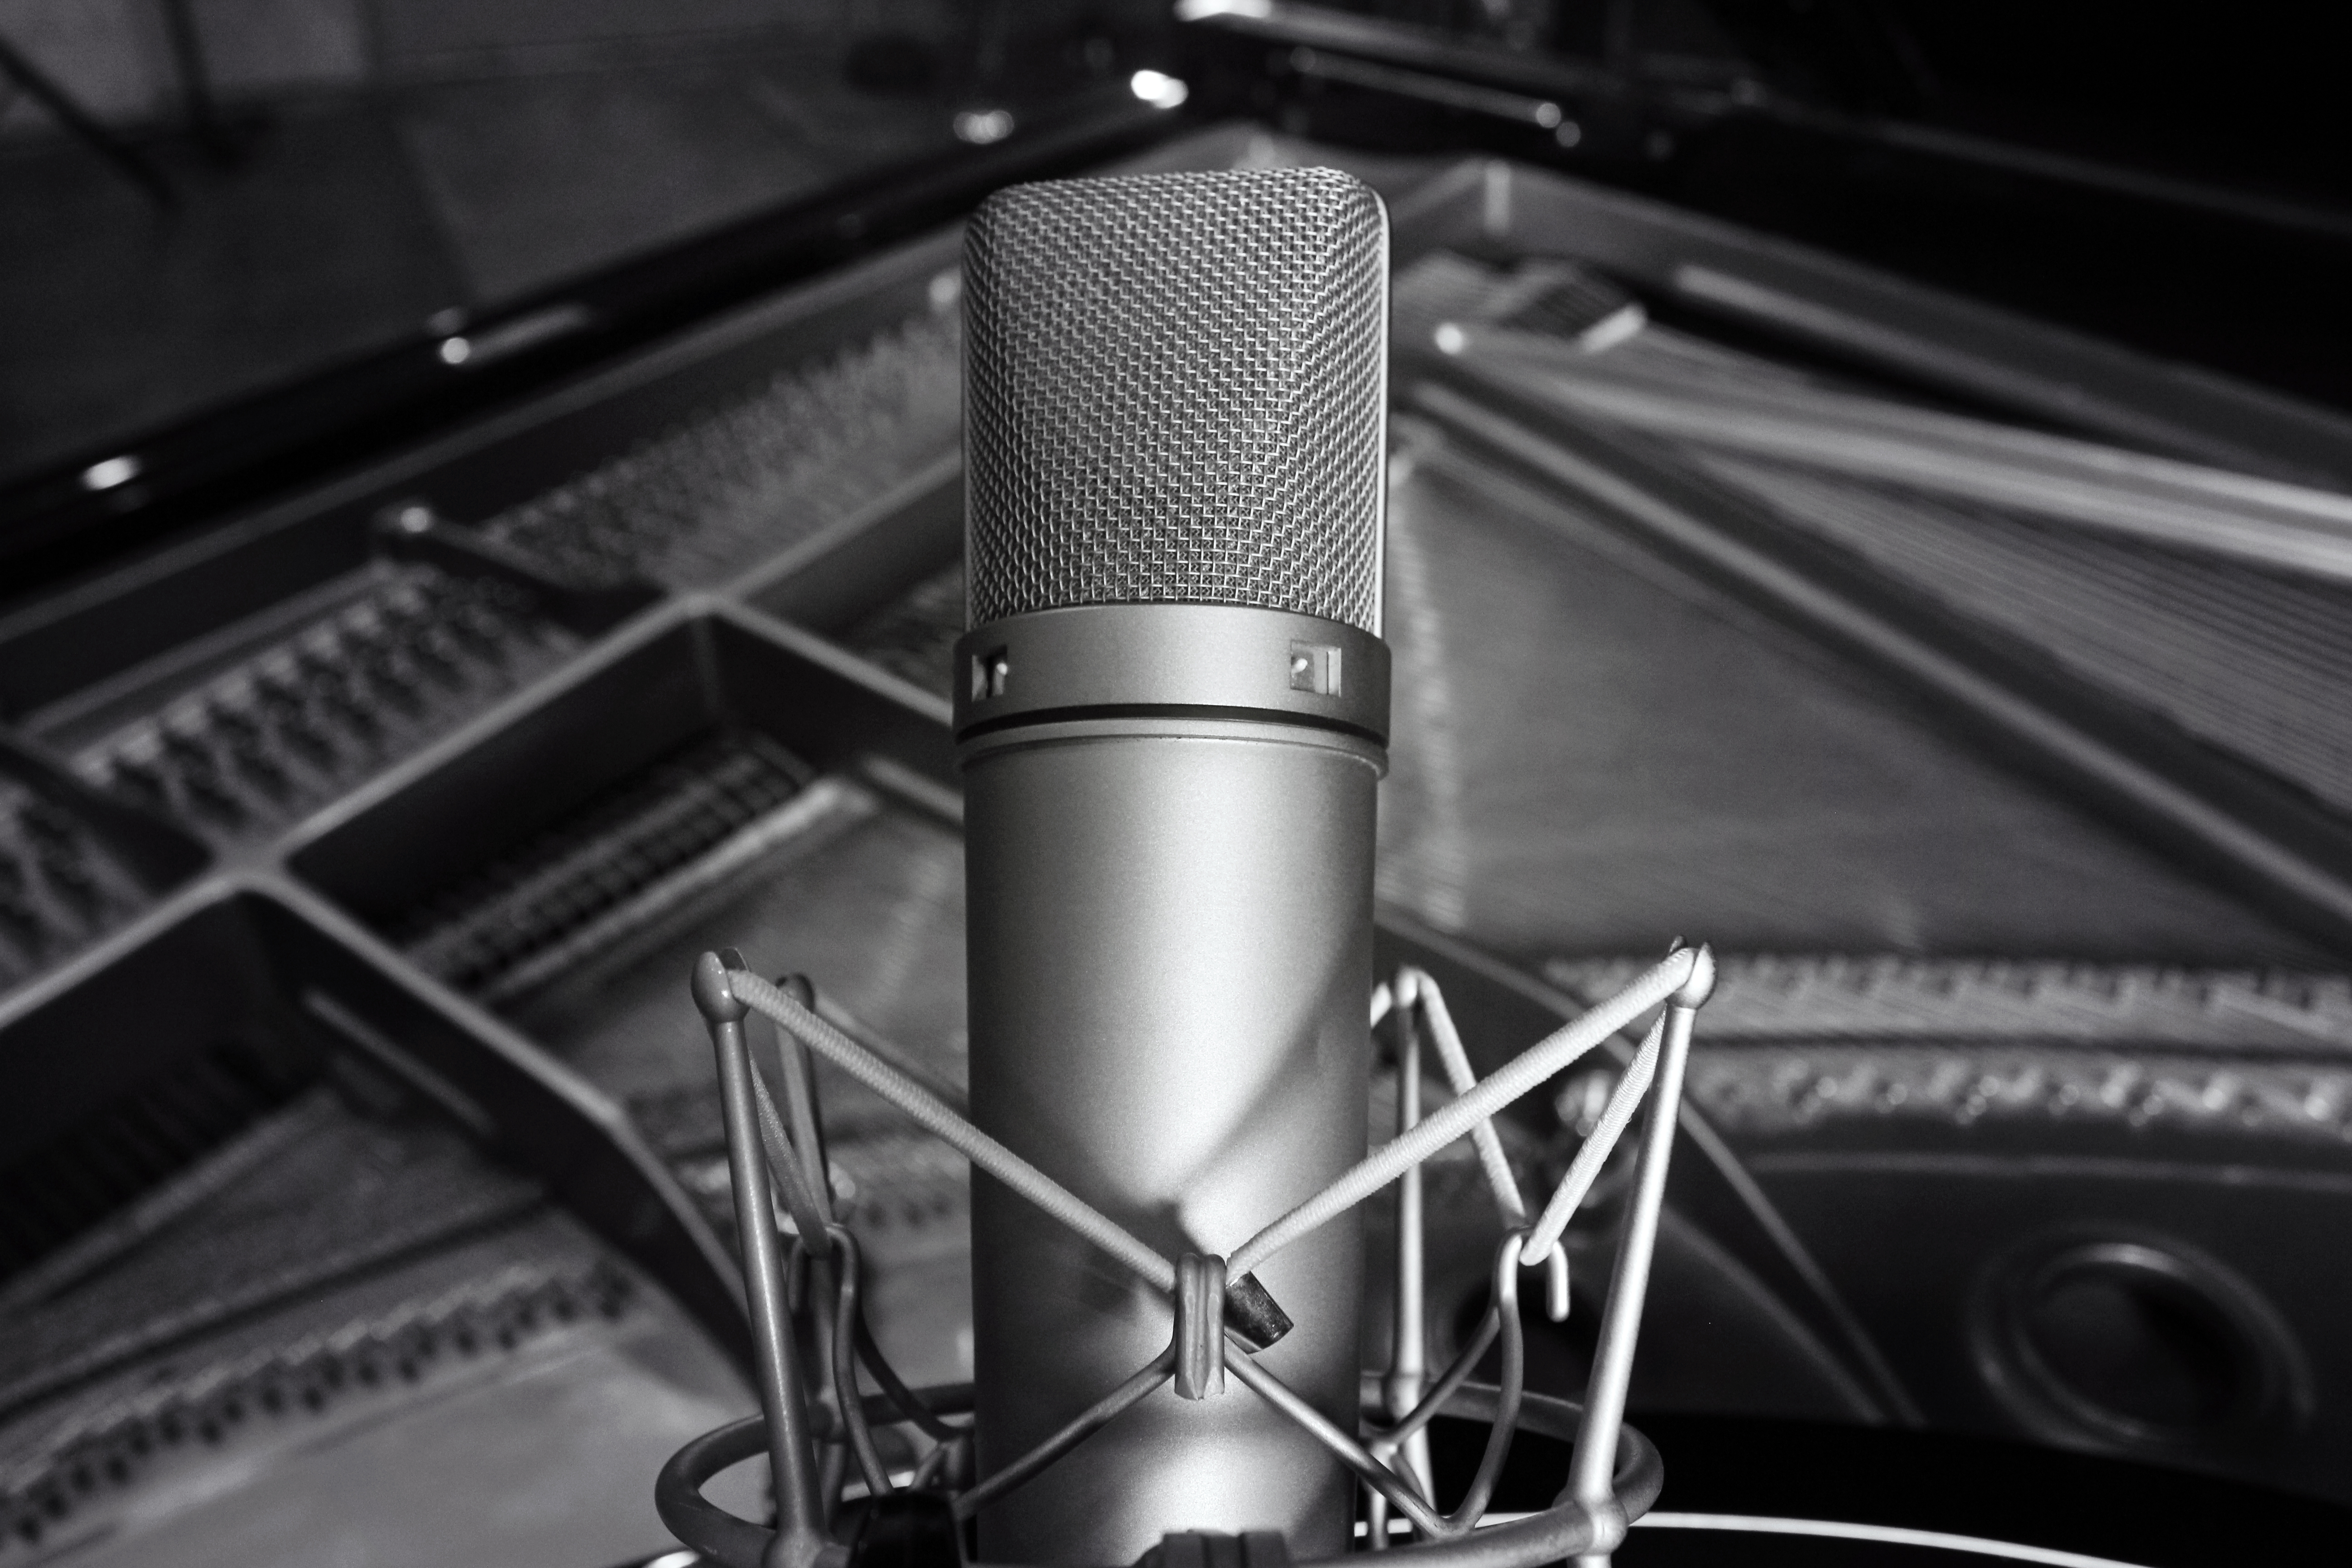 Black and white image of studio microphone foregrouding sound mixing equipment.